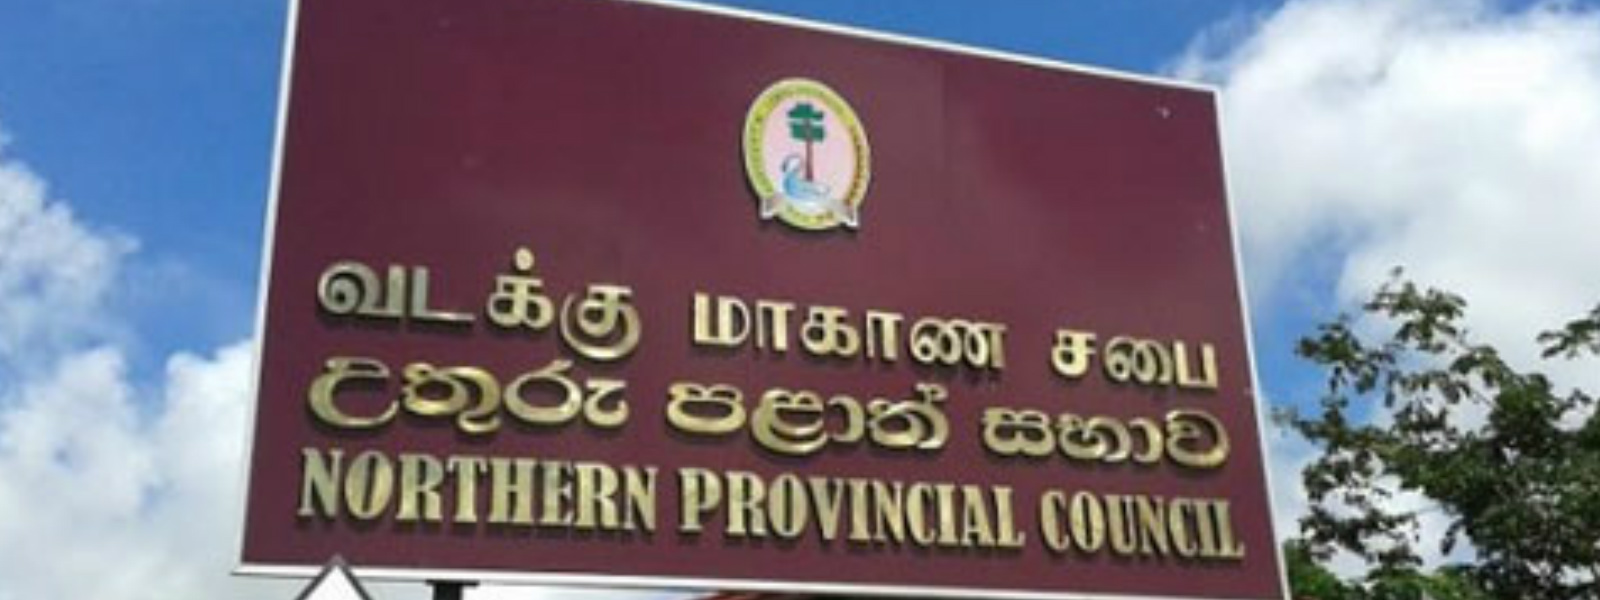 Tenure of another Prov. Council comes to an end